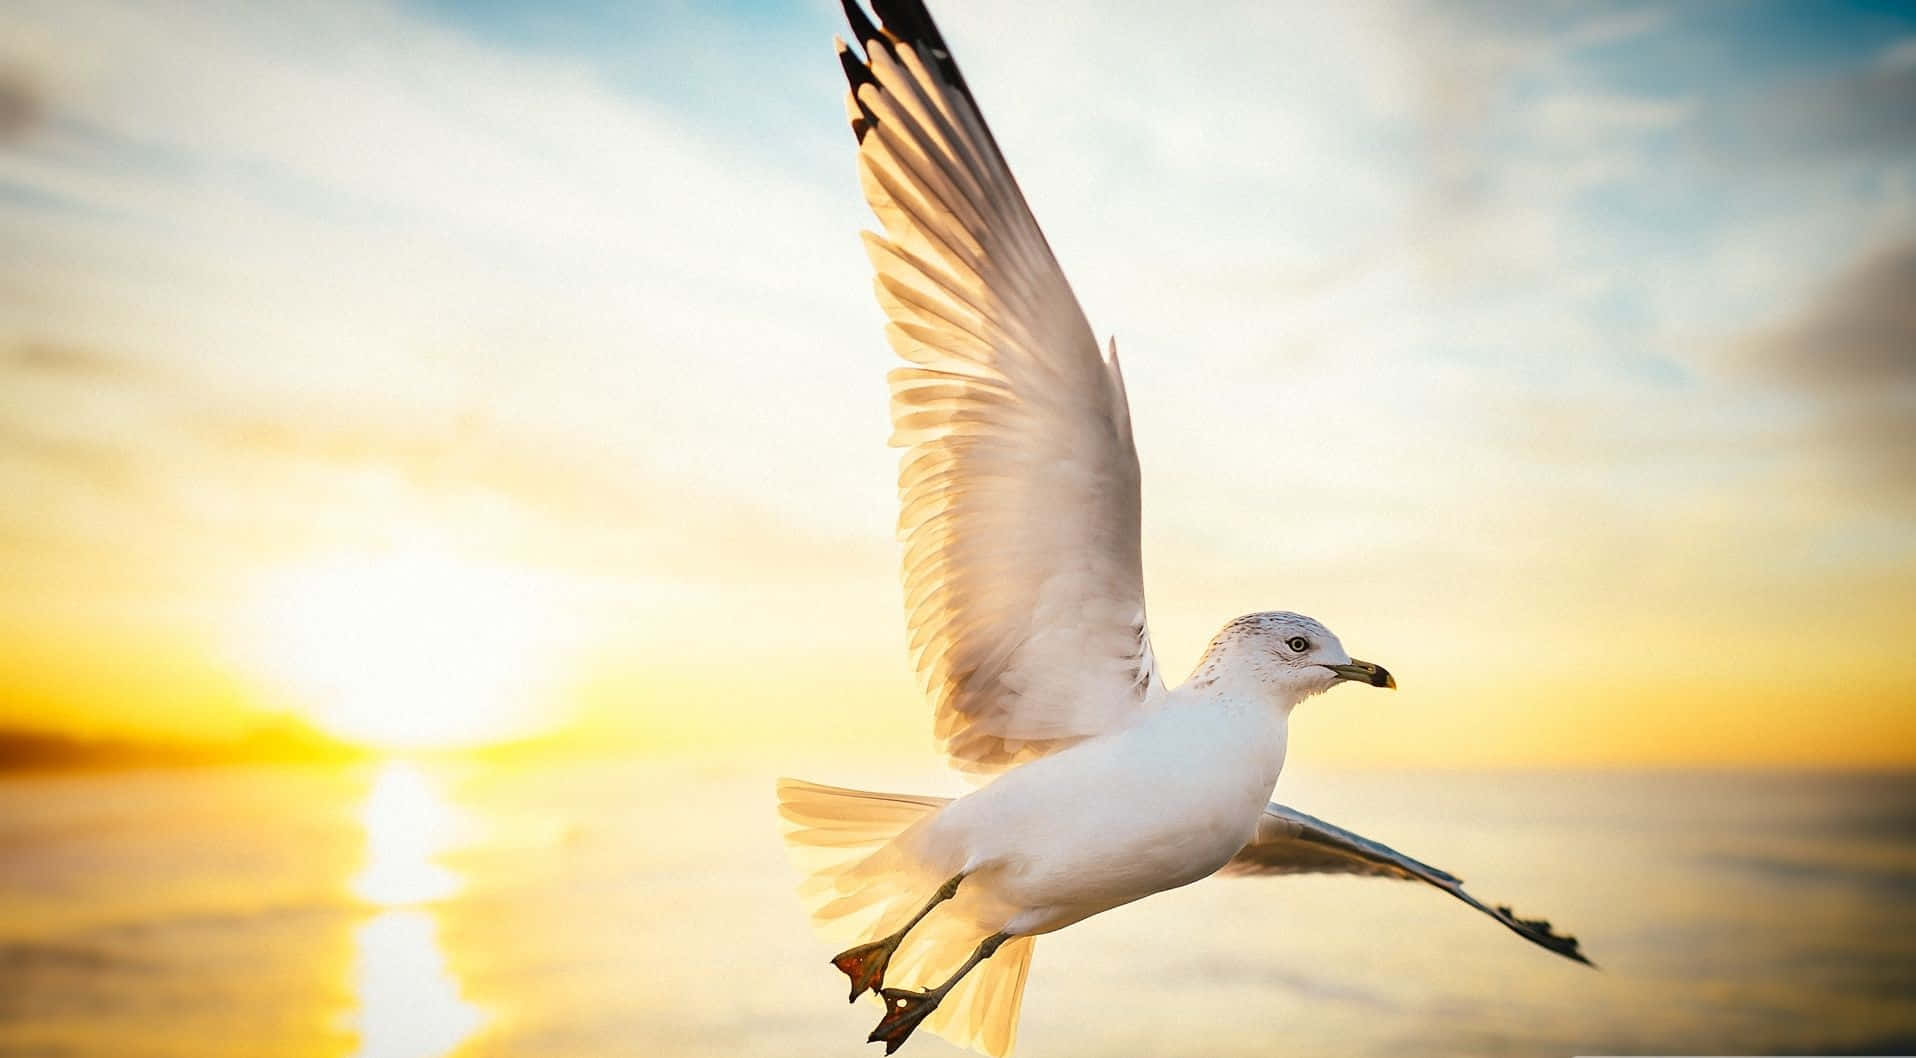 Caption: Majestic Seagull Soaring in the Sky Wallpaper